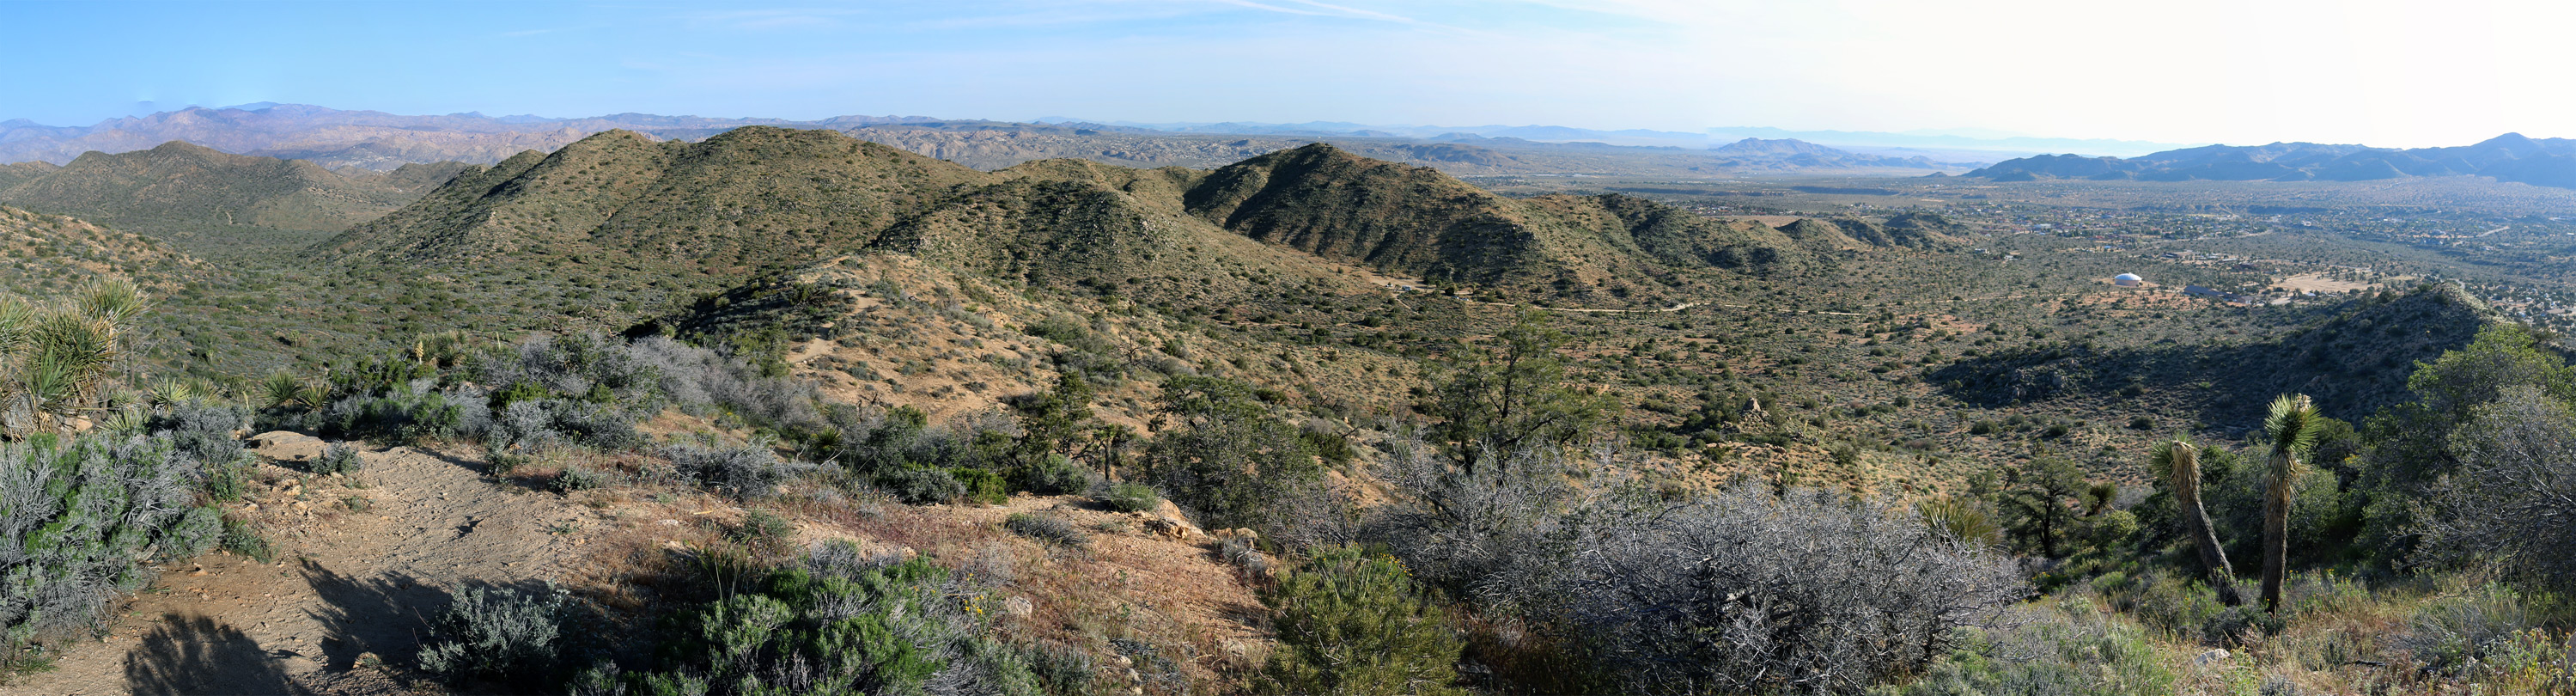 Panorama from the high point